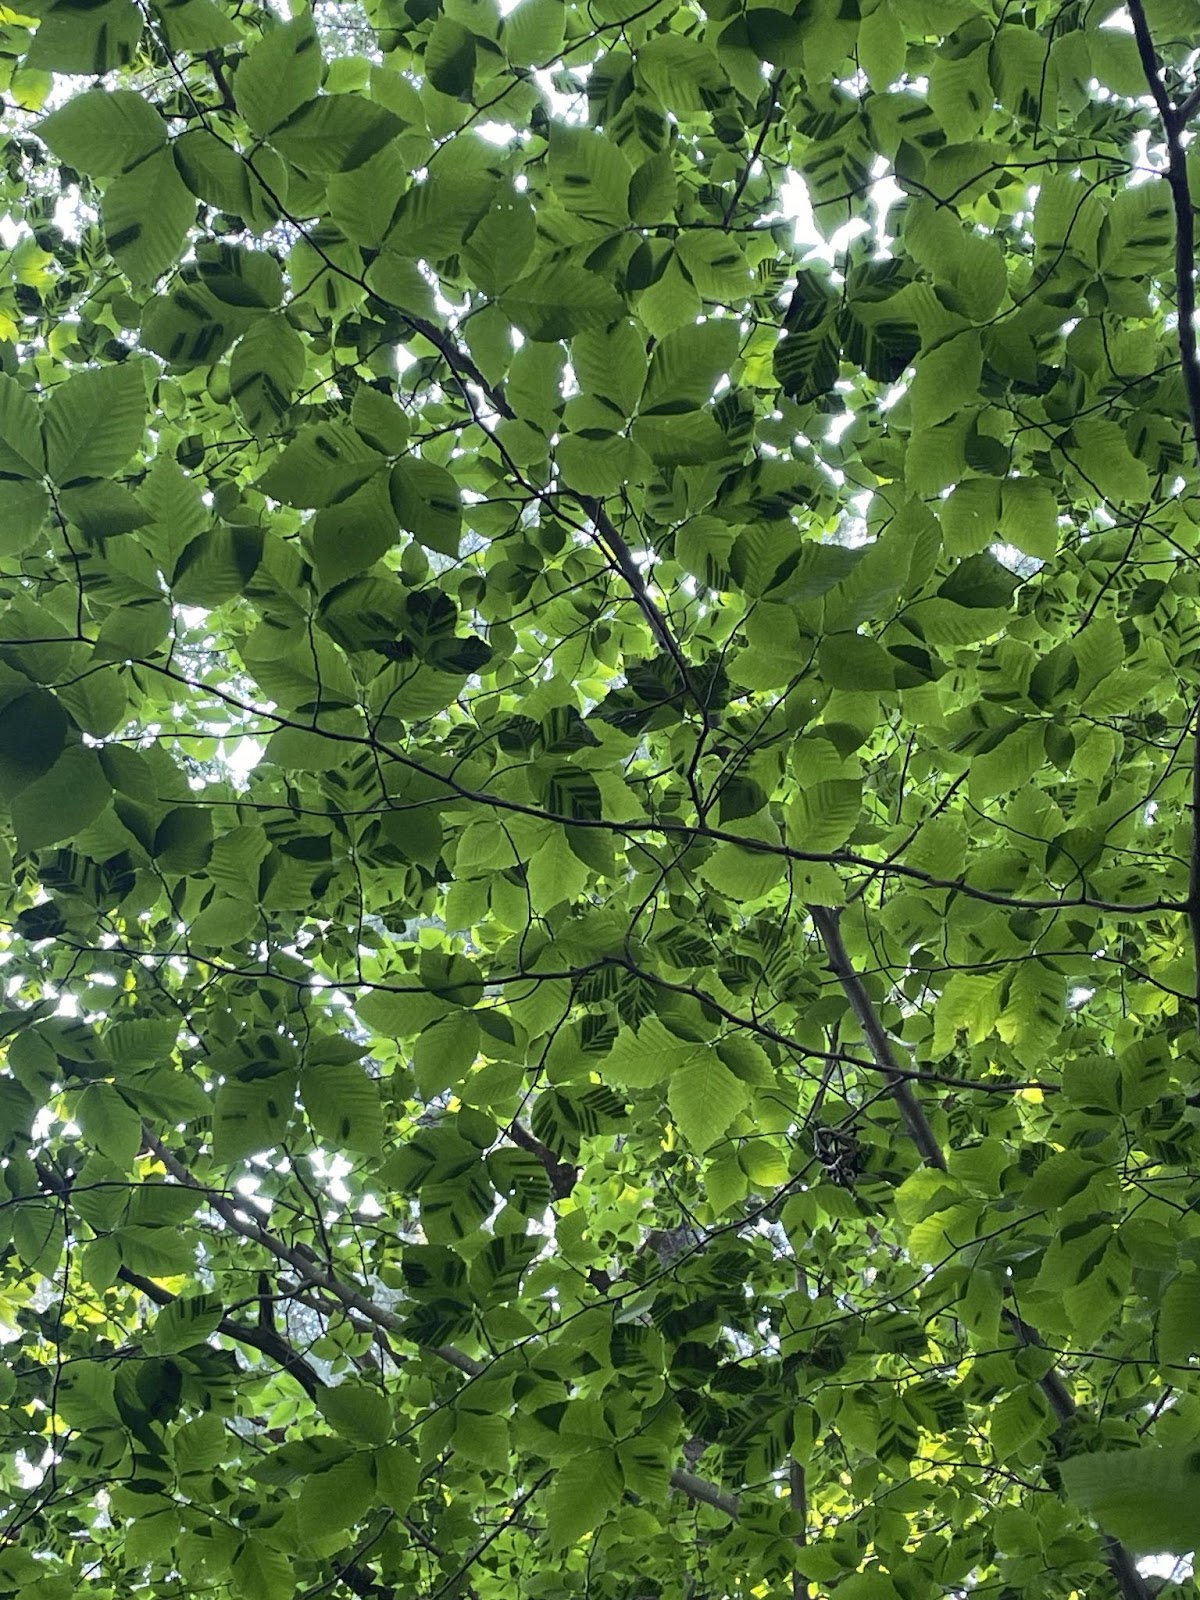 Photo looking upwards into a beech tree canopy, most leaves have dark stripes in them.